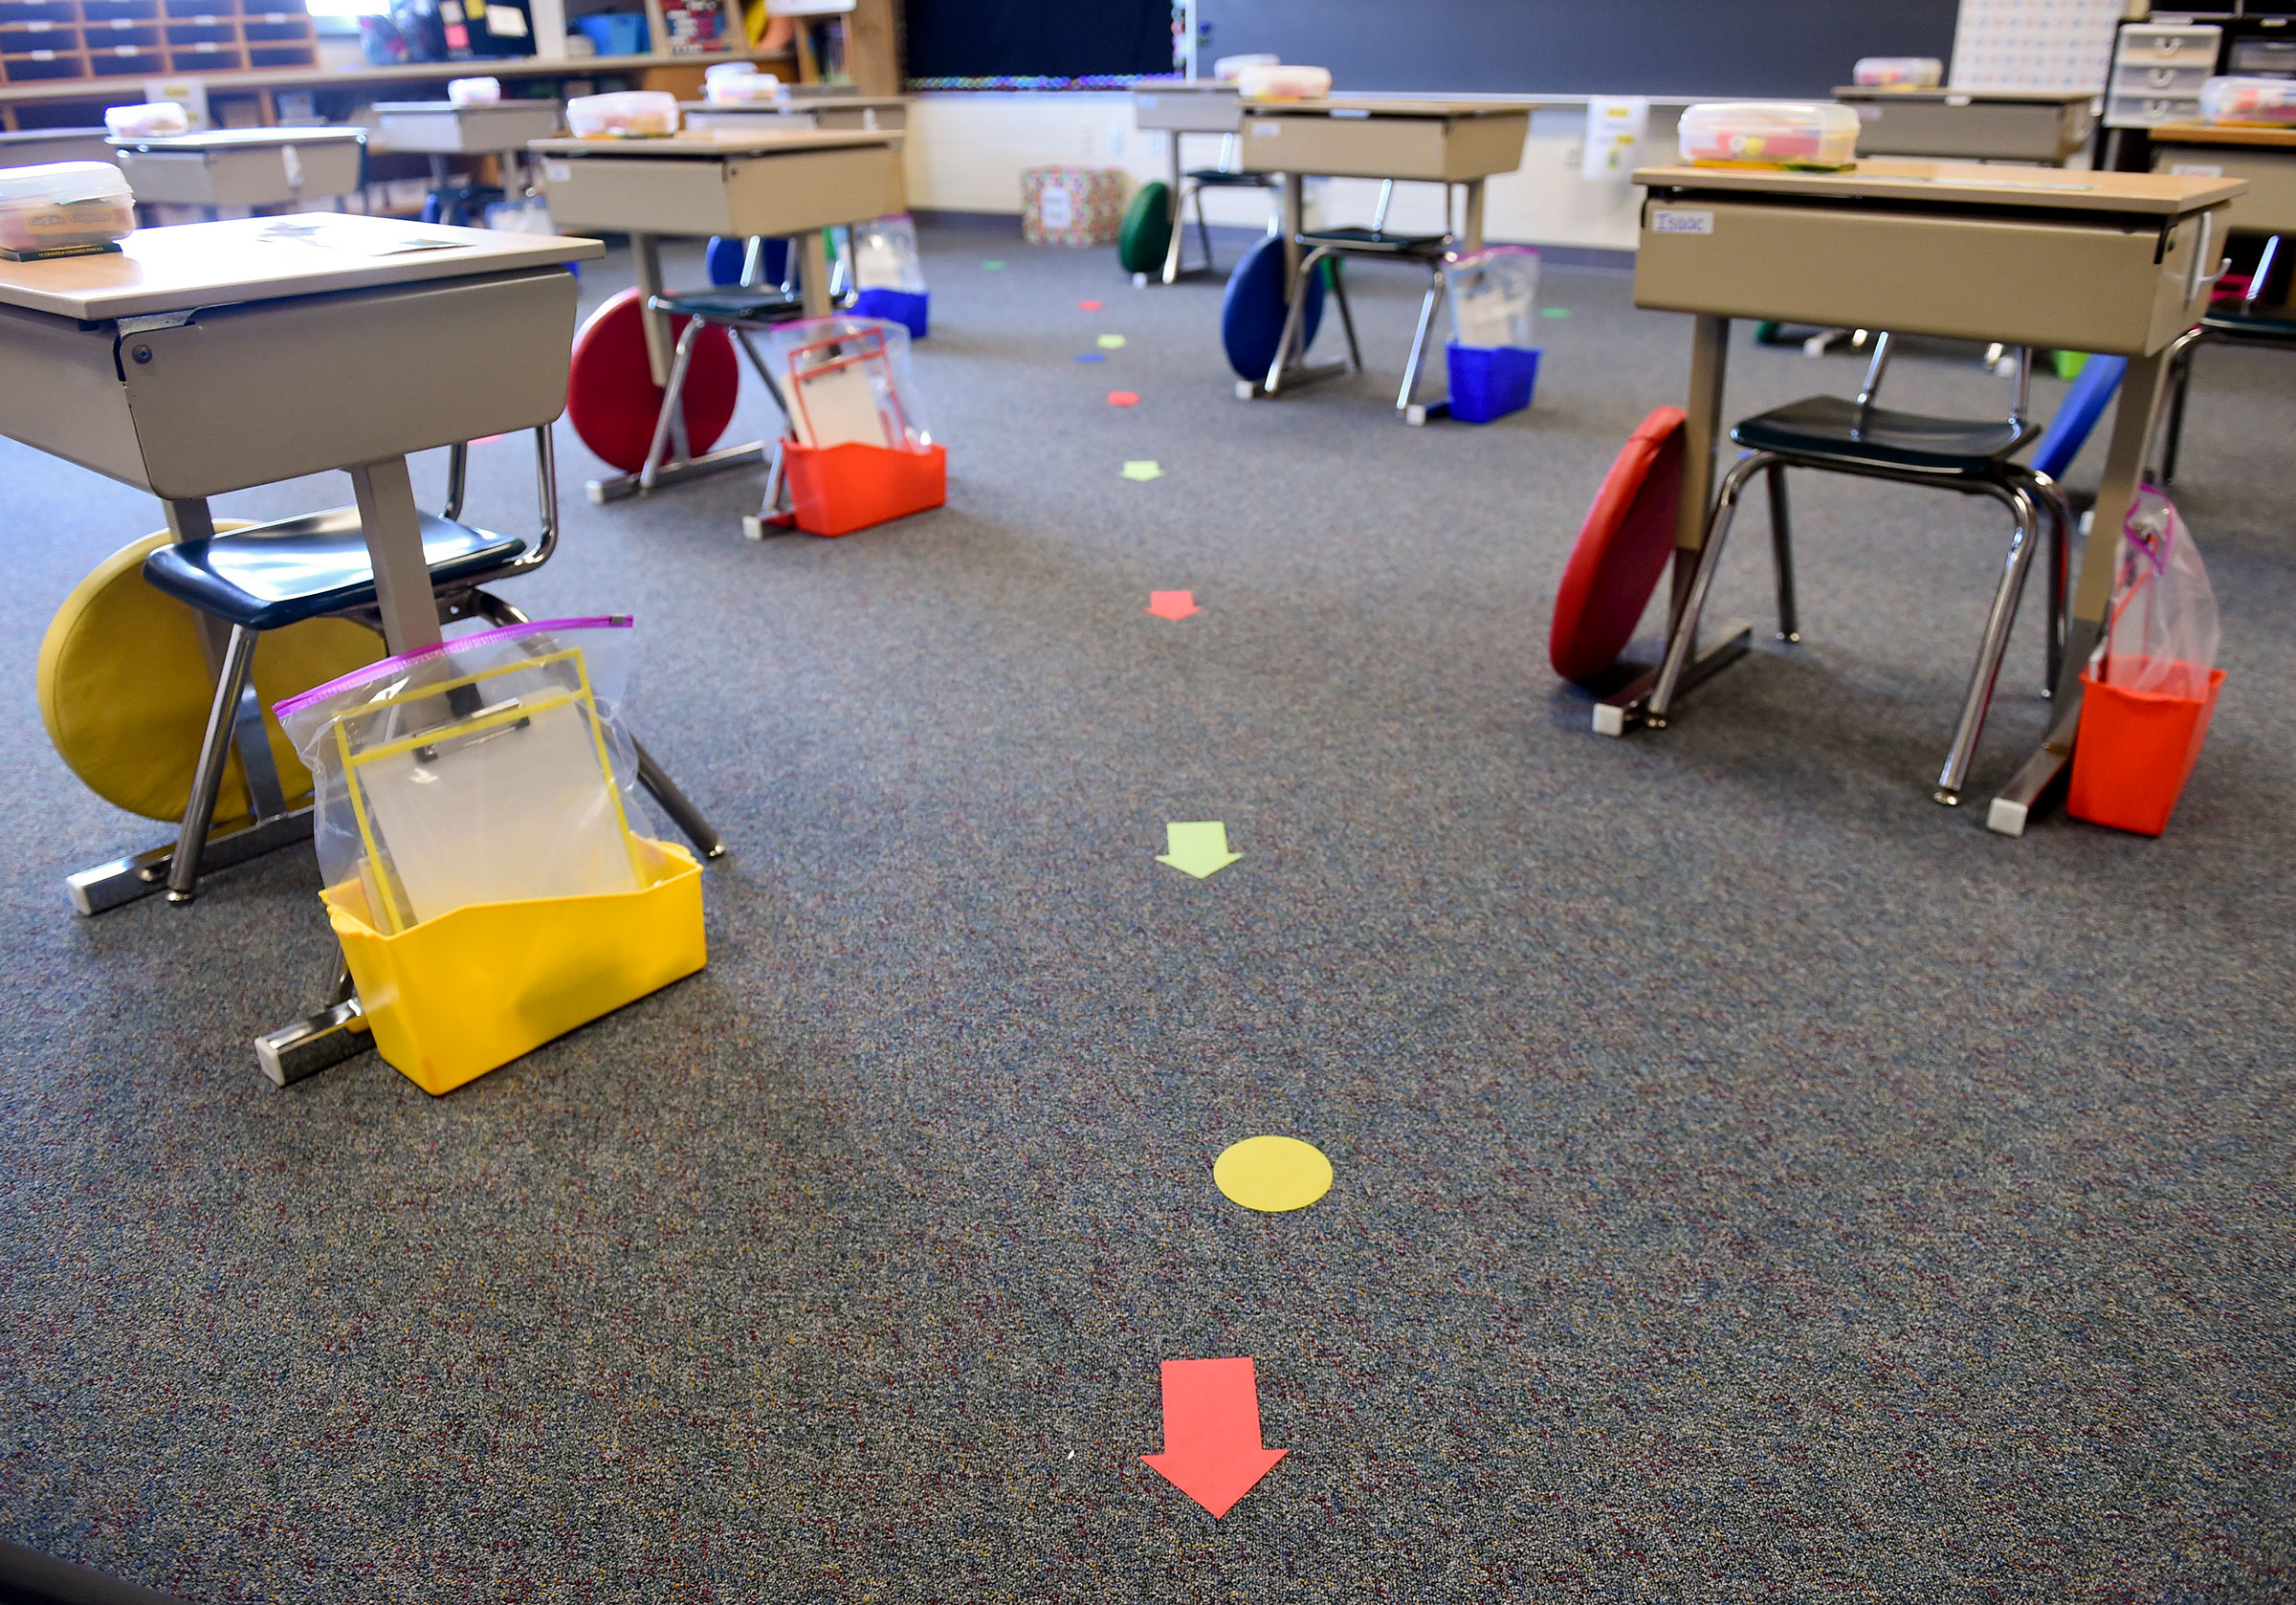 Desks are spread out for social distancing at a Shiloh Hills Elementary School classroom in Spring Township, Pa., on Aug. 21, 2020. (Ben Hasty—MediaNews Group/Reading Eagle/Getty Images)